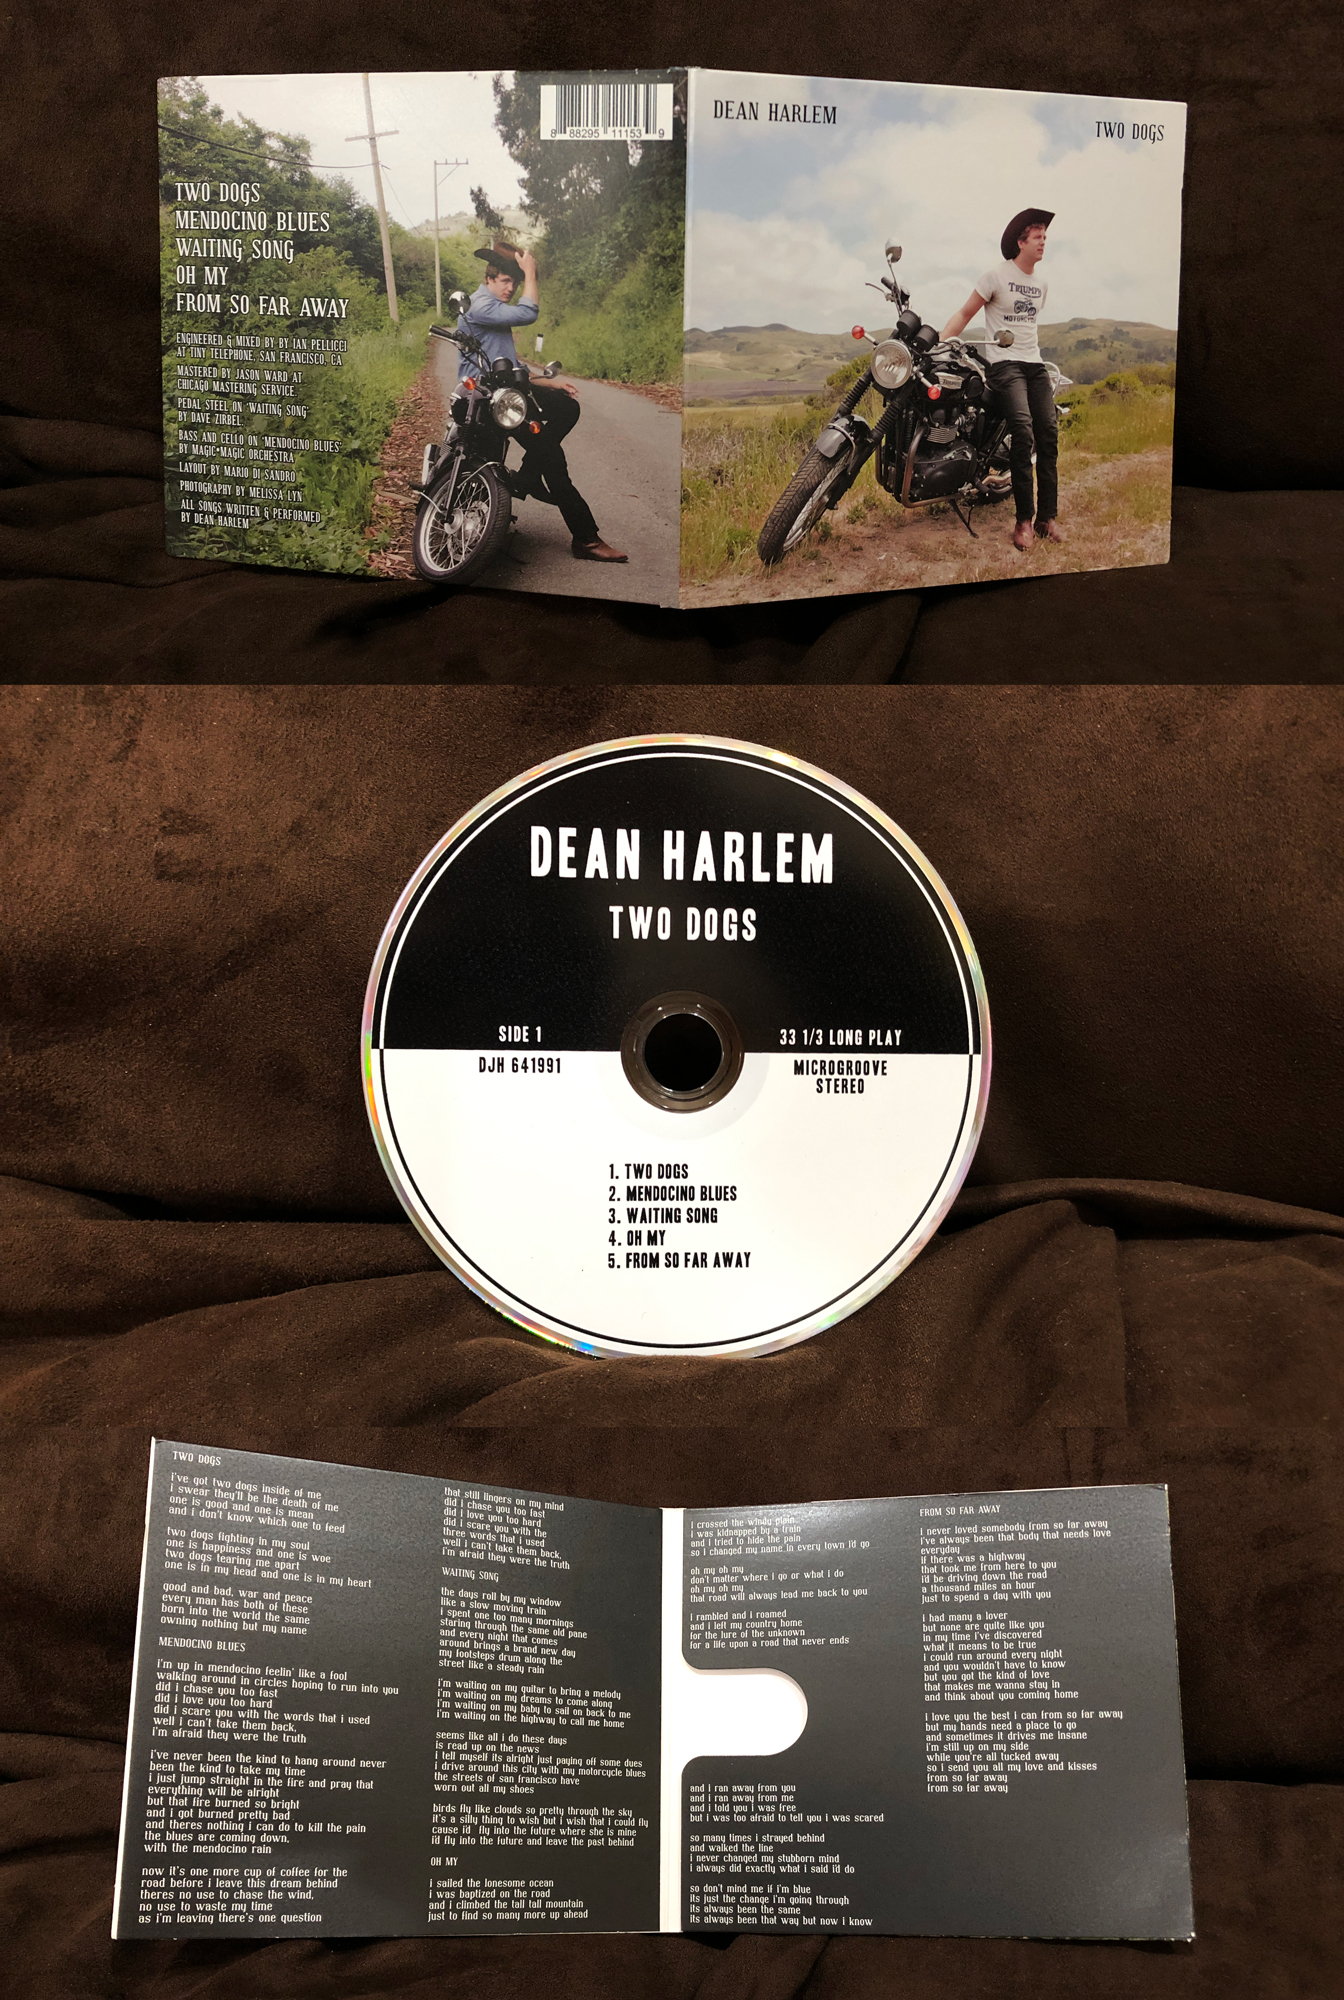 Client: Dean Harlem, touring singer-songwriter and musician based in the East Coast. Description: Designed the packaging for Dean Harlem's album Two Dogs.